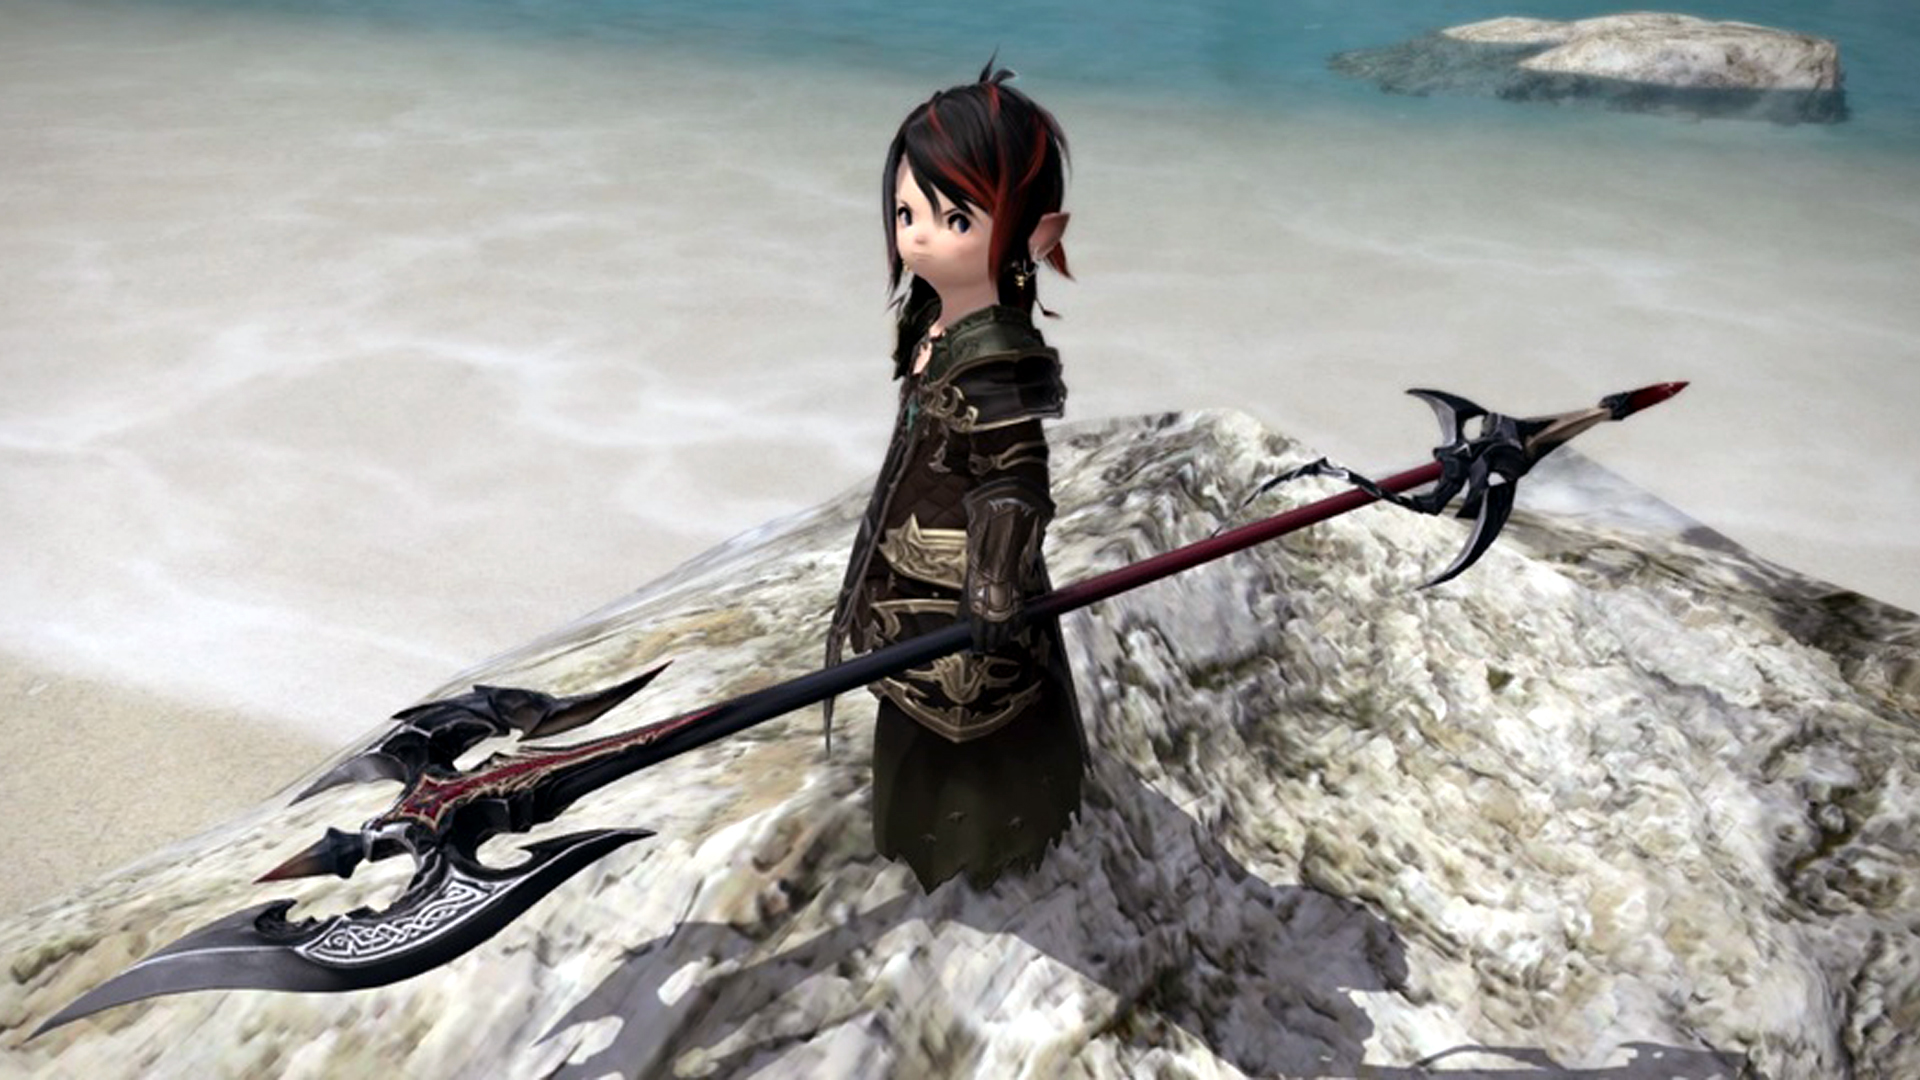 You’ll be able to directly harpoon fish in Final Fantasy XIV: Endwalker